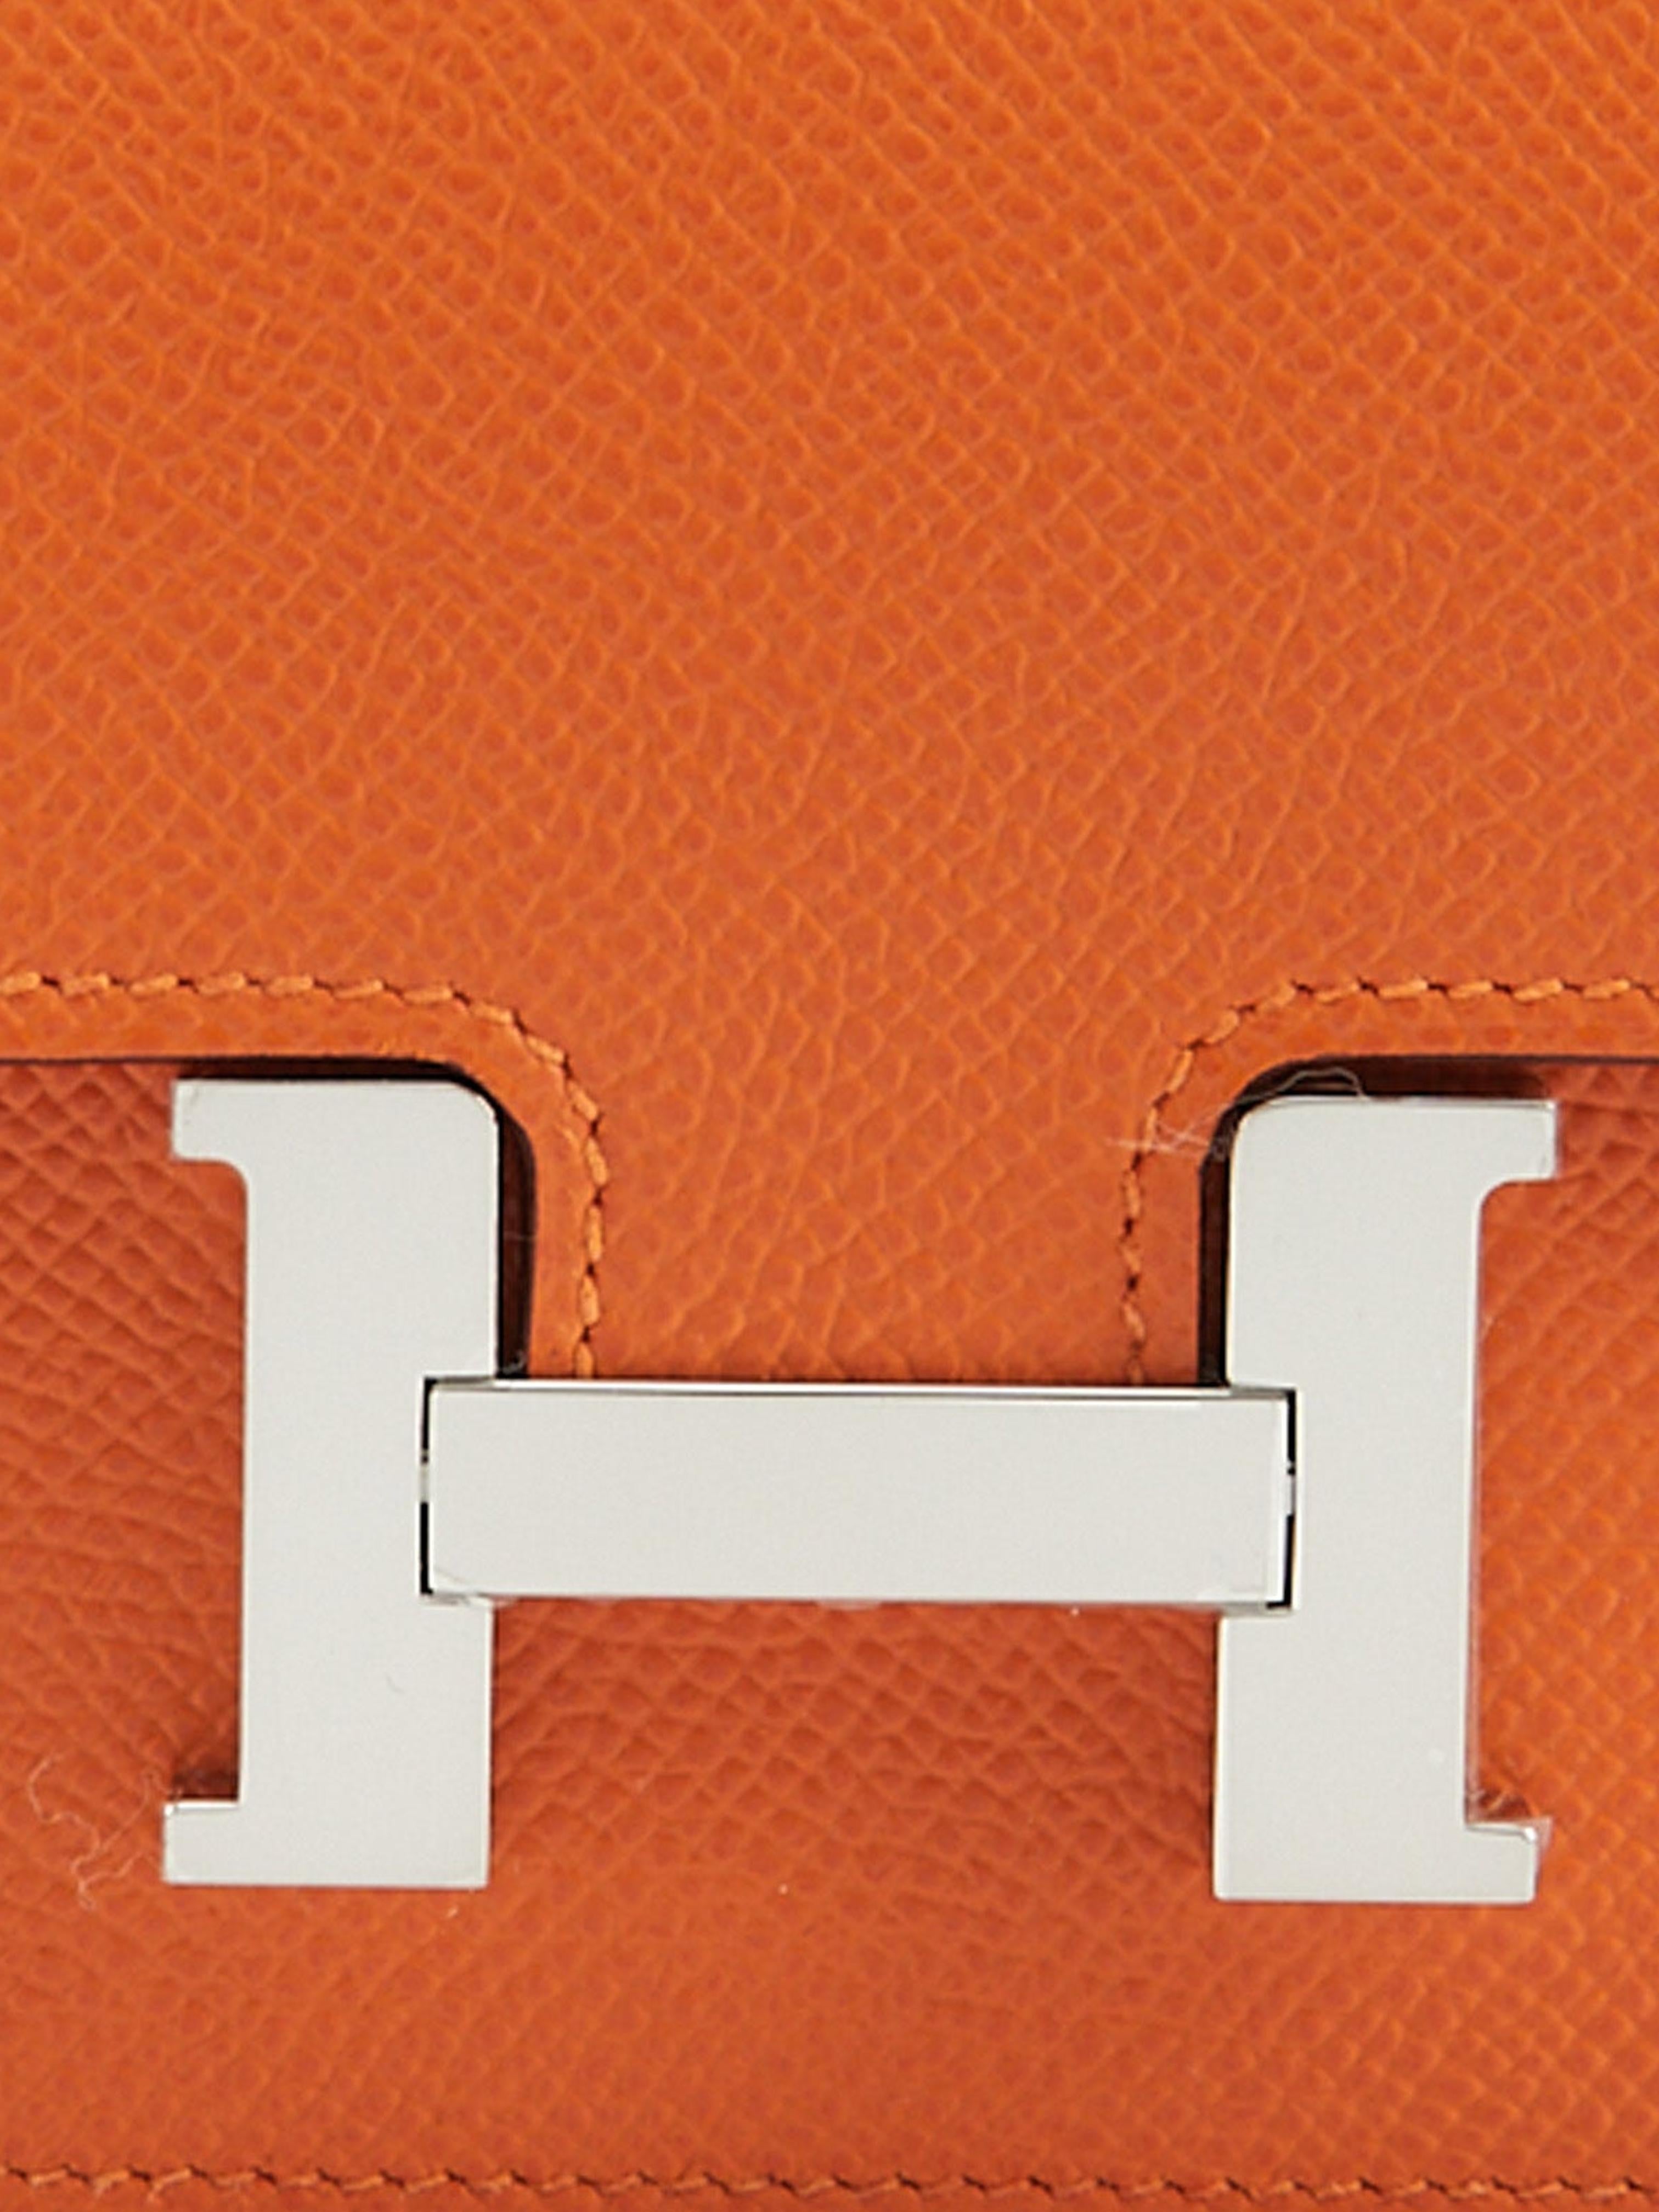 Hermès Constance Slim Wallet in Orange

Epsom Leather with Palladium Hardware

Slim wallet with removable zipped change purse, two credit card slots and belt loop 

Dimensions: L 12.4 x H 10.2 x D 3 cm